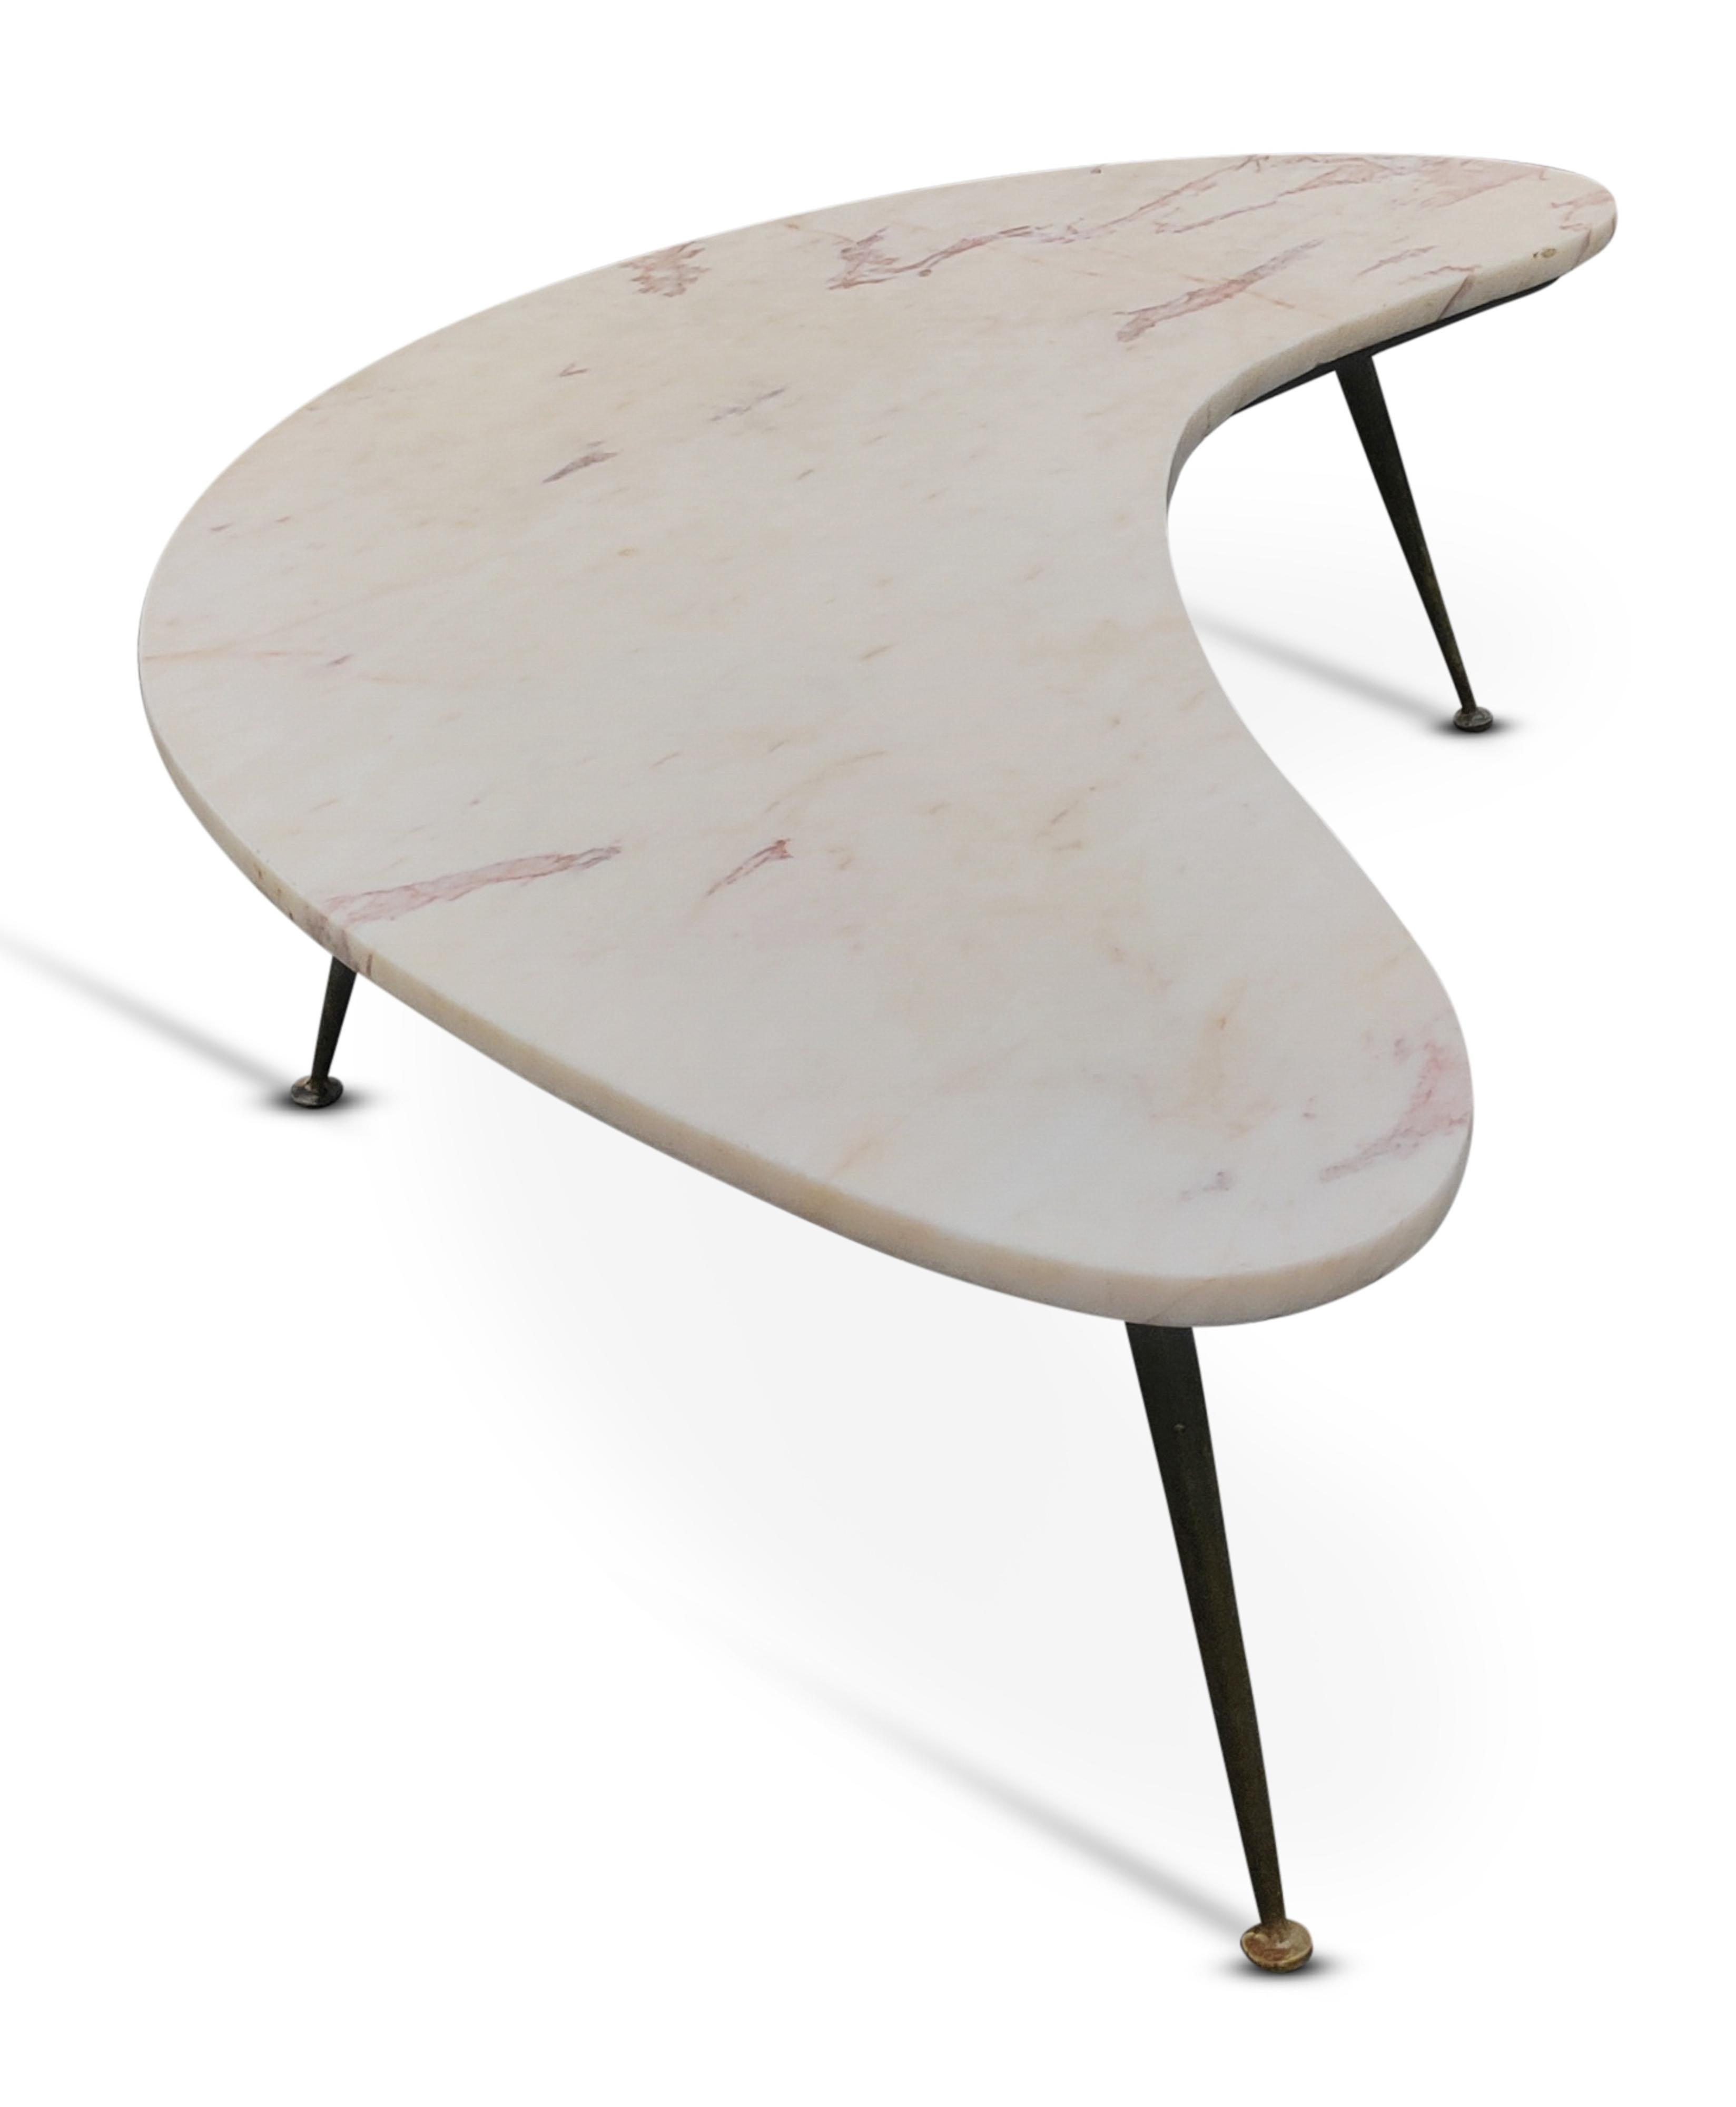 For your consideration, an authentic and completely original Italian coffee table, circa 1950s, in the Style of Gio Ponti. Shaped like a crescent, or boomerang, with a 21.75 inch width at its center, it has an off-white, almost pink, color streaked